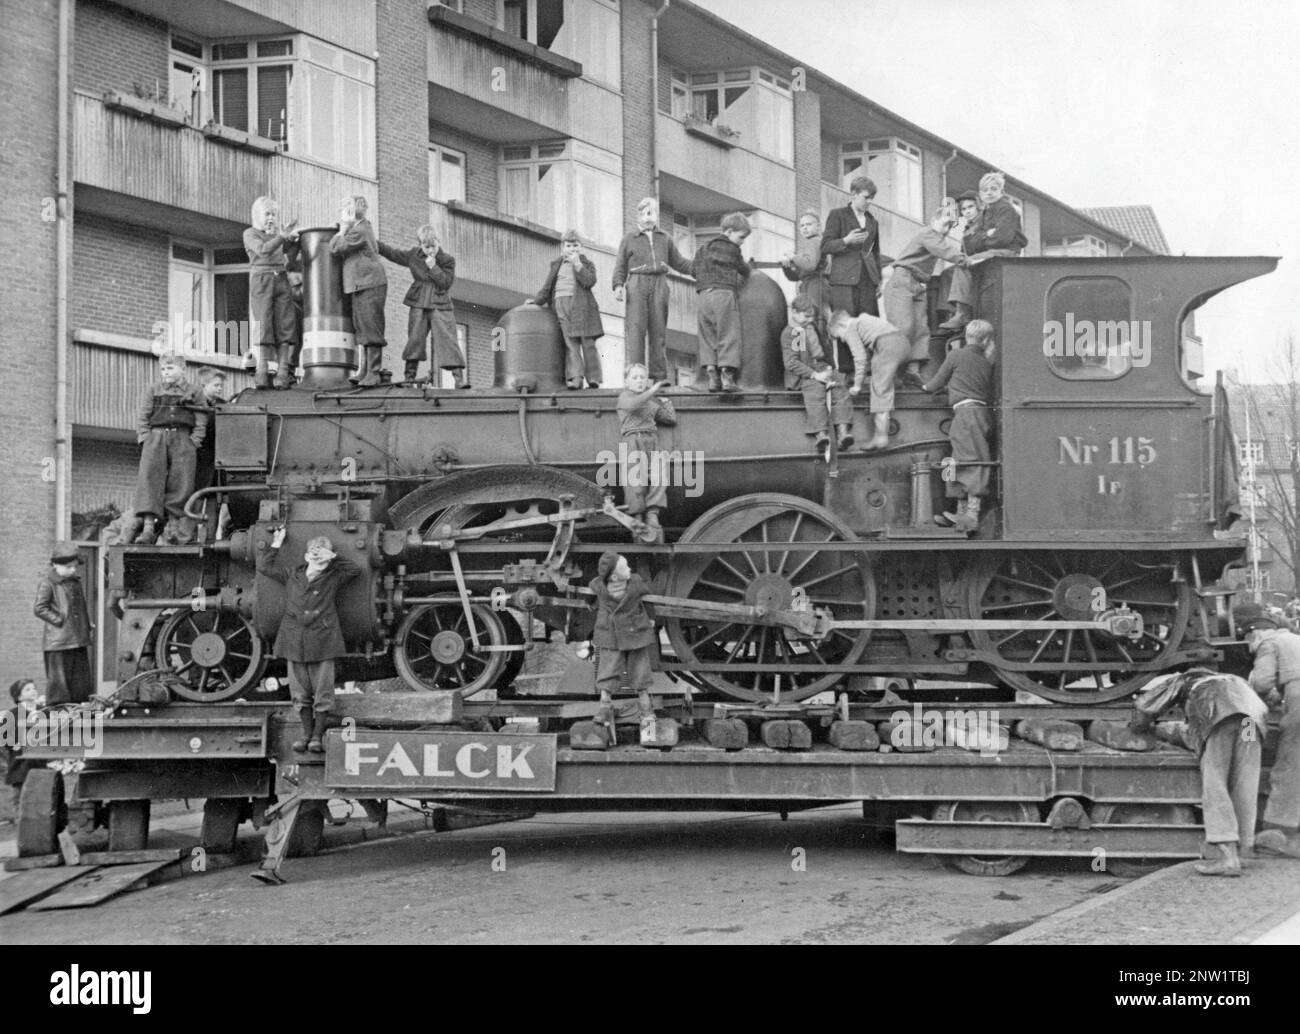 Steam locomotive off the tracks. A group of boys is pictured climbing and being on the locomotive being transported on a narrow street in Stockholm in the 1940s. It is standing on lorrys and looks as if it is being turned in the street, a complicated maneuver. Stock Photo